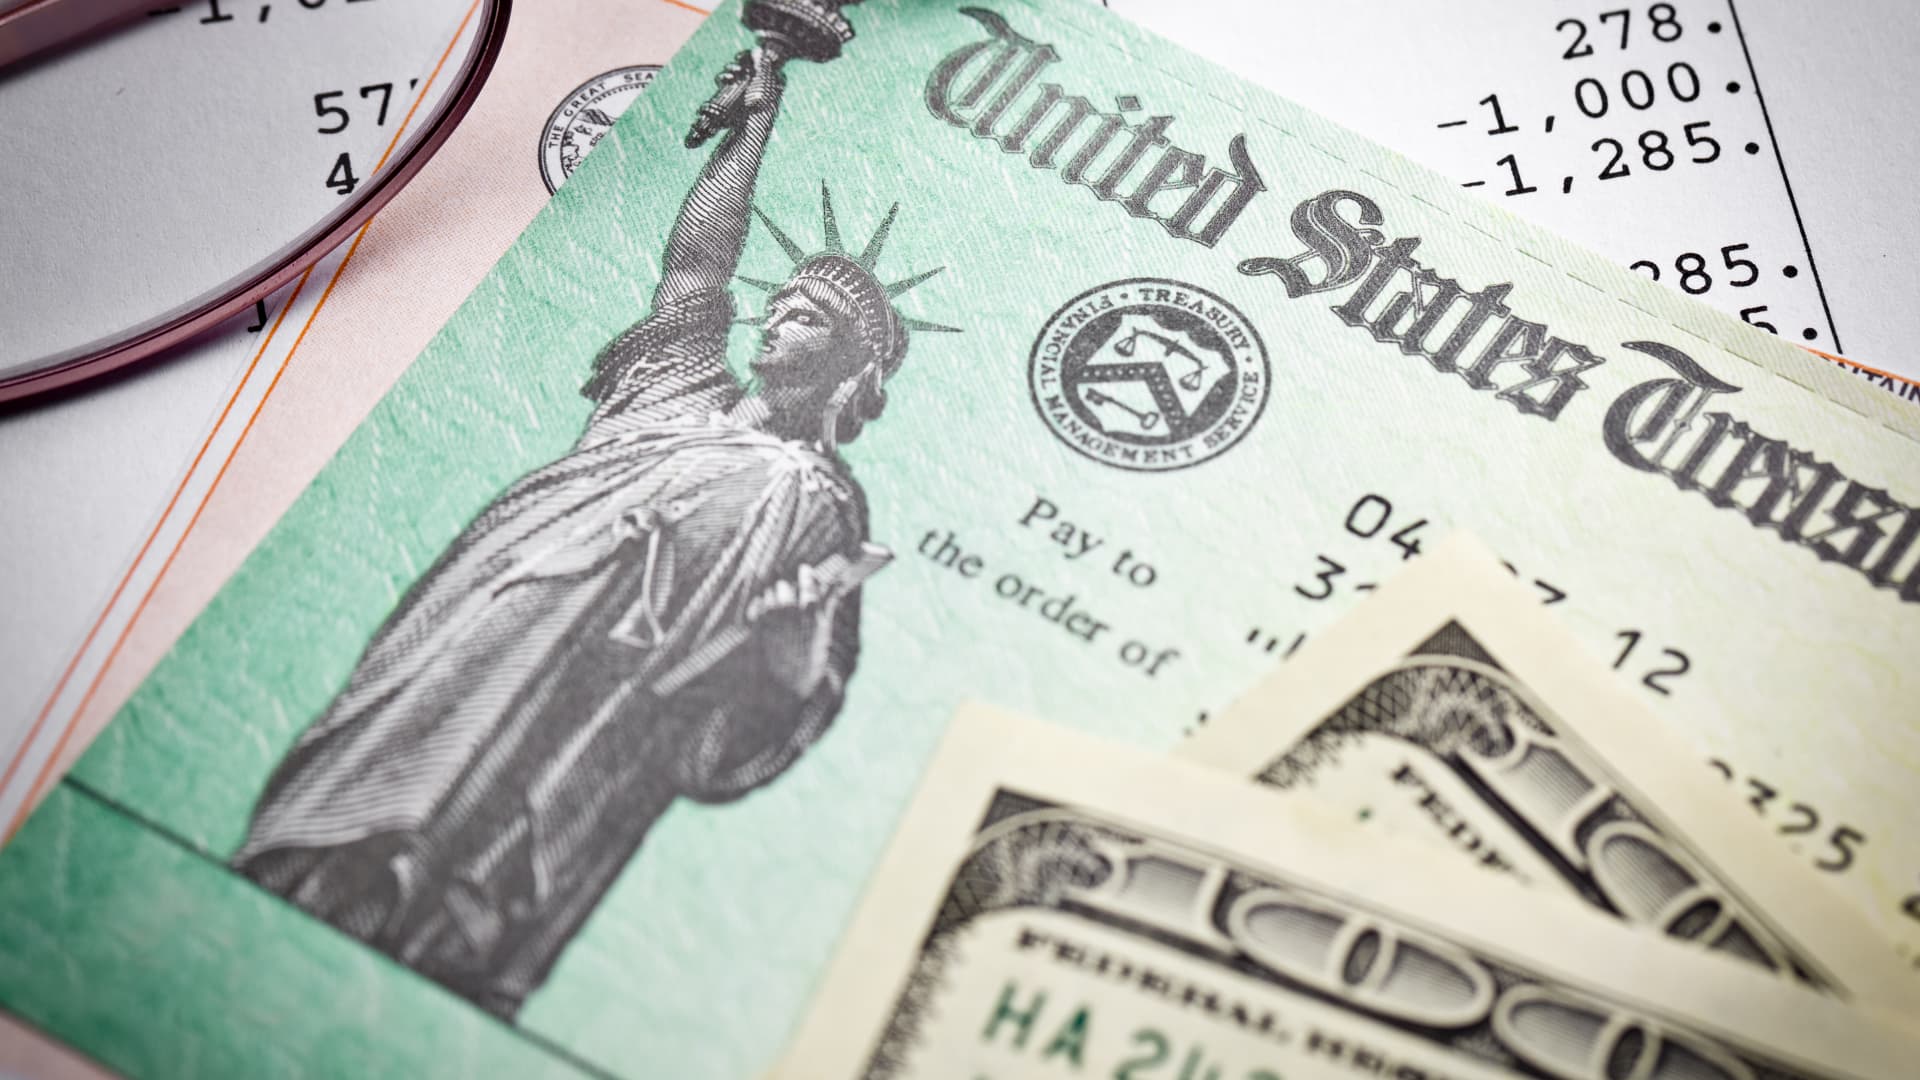 The IRS interest rate for unpaid refunds and balances will soon be 7%